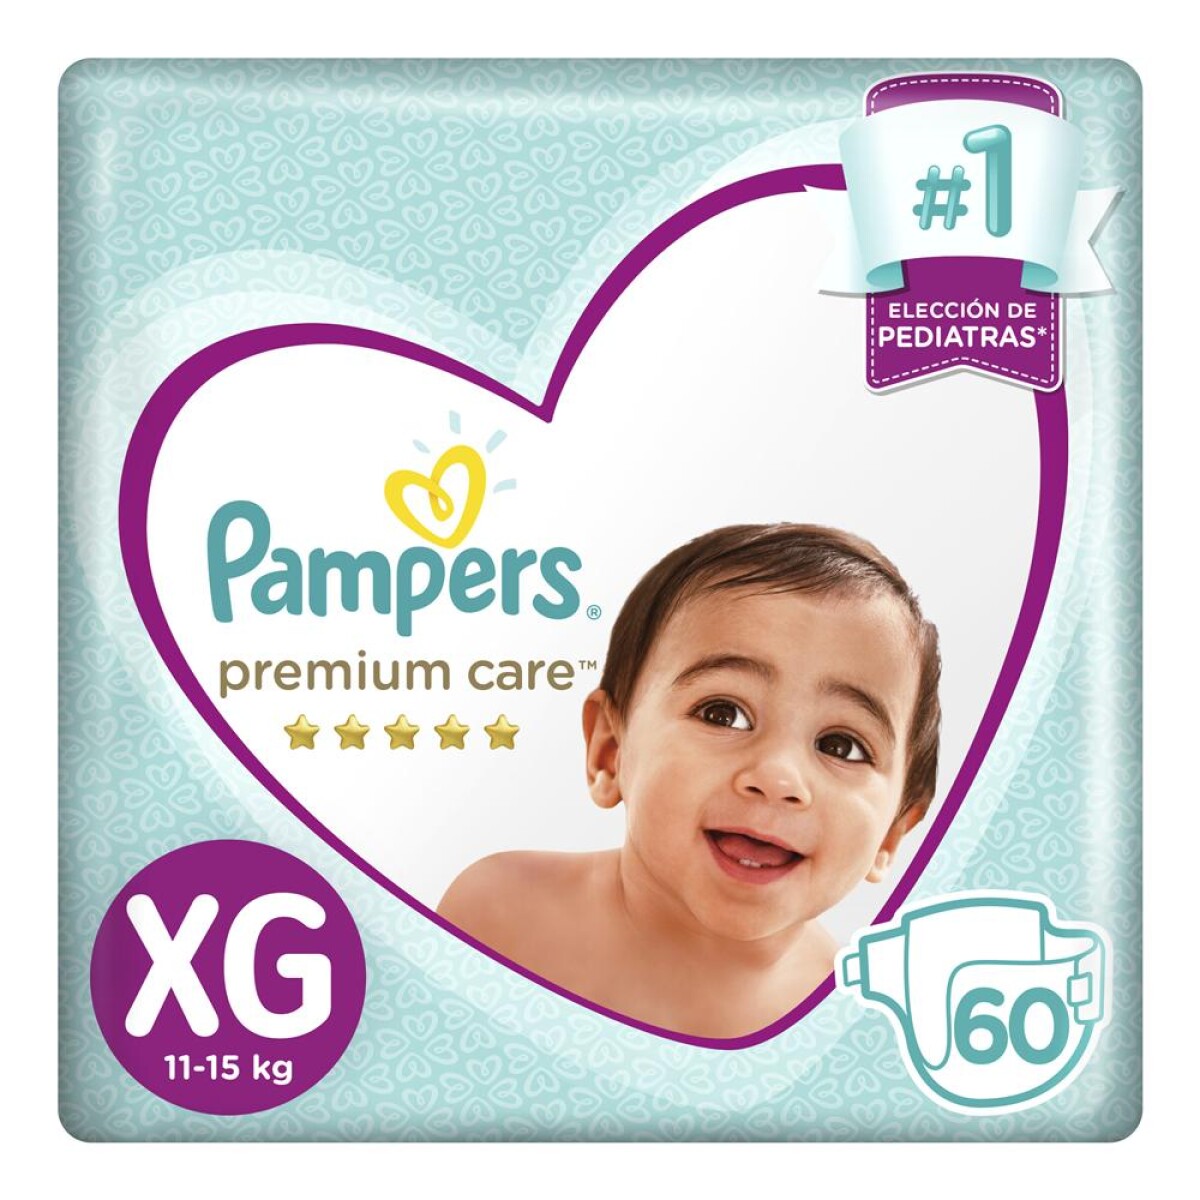 Pañales Pampers Premium Care Talle Xg 60 Uds. 